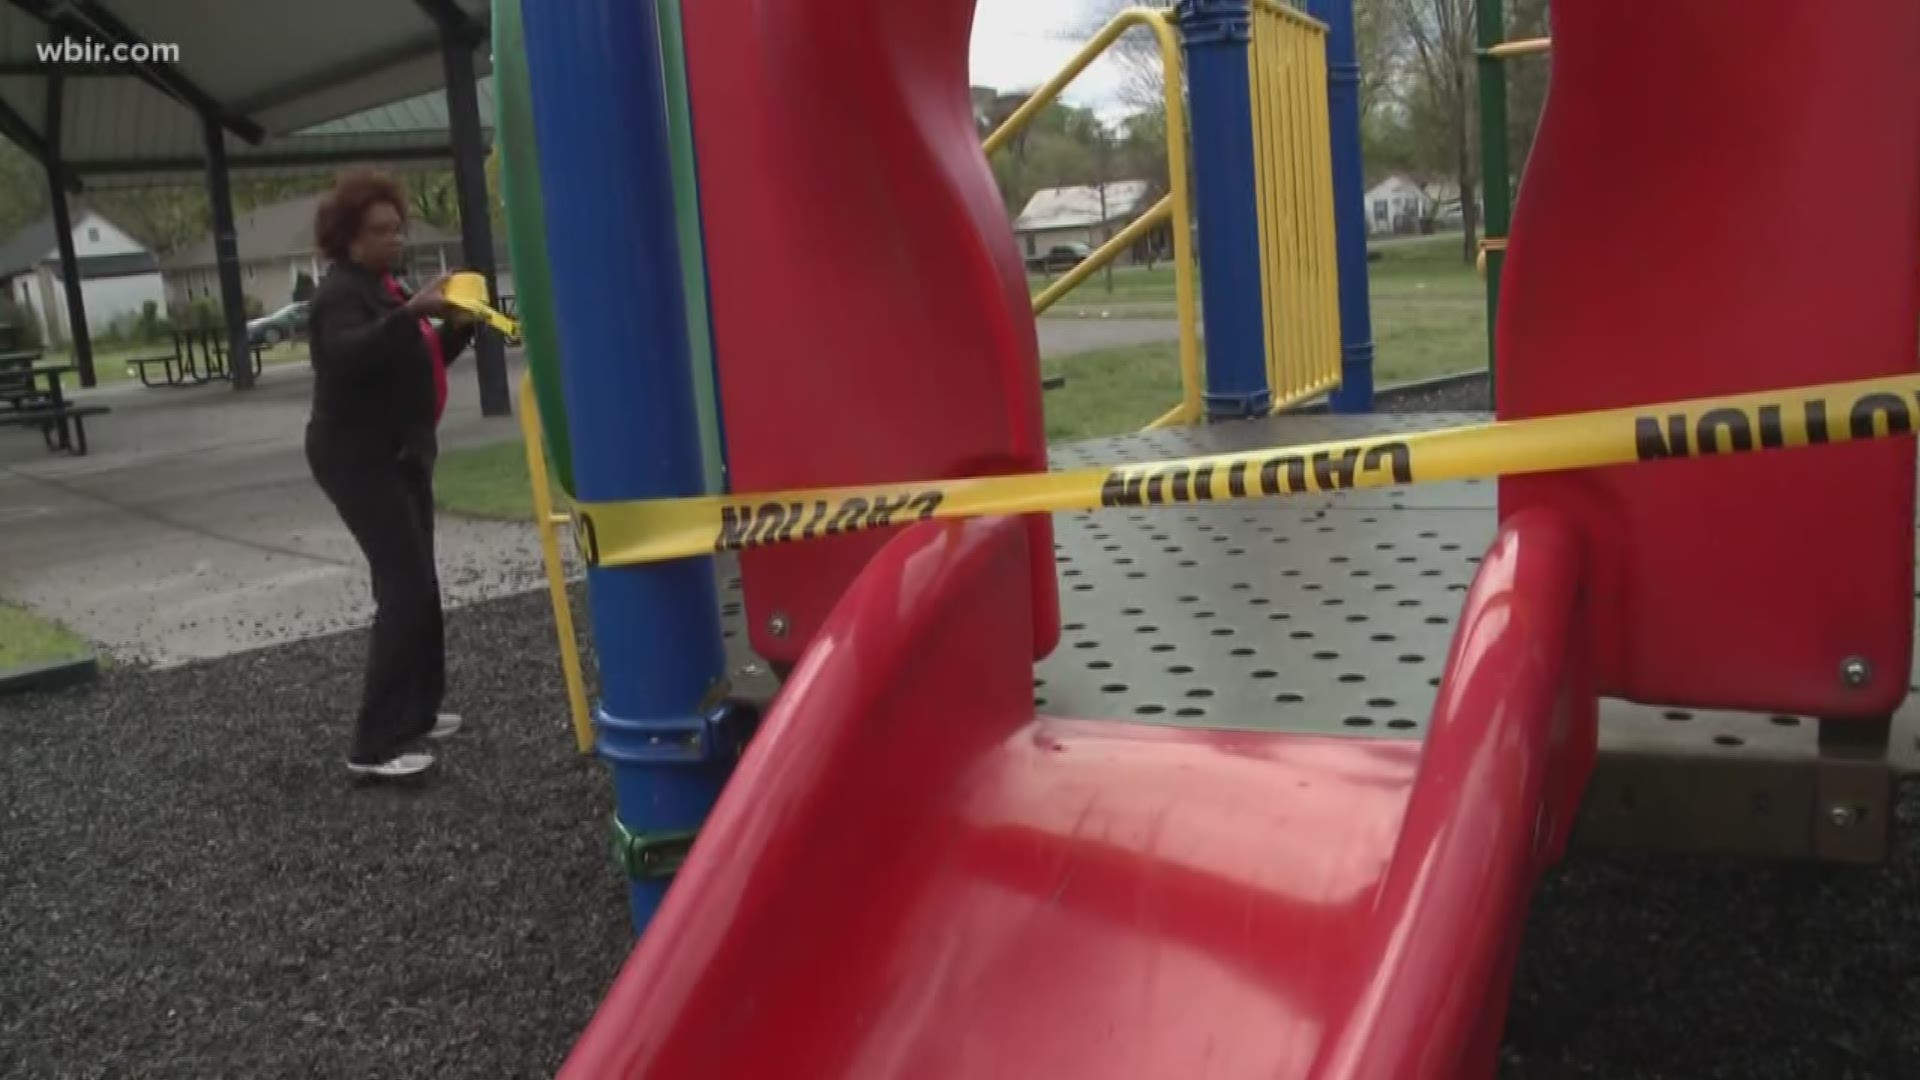 The city has put up caution tape to remind Knoxvillians they're not supposed to use playground equipment or courts while coronavirus cautions are in place.